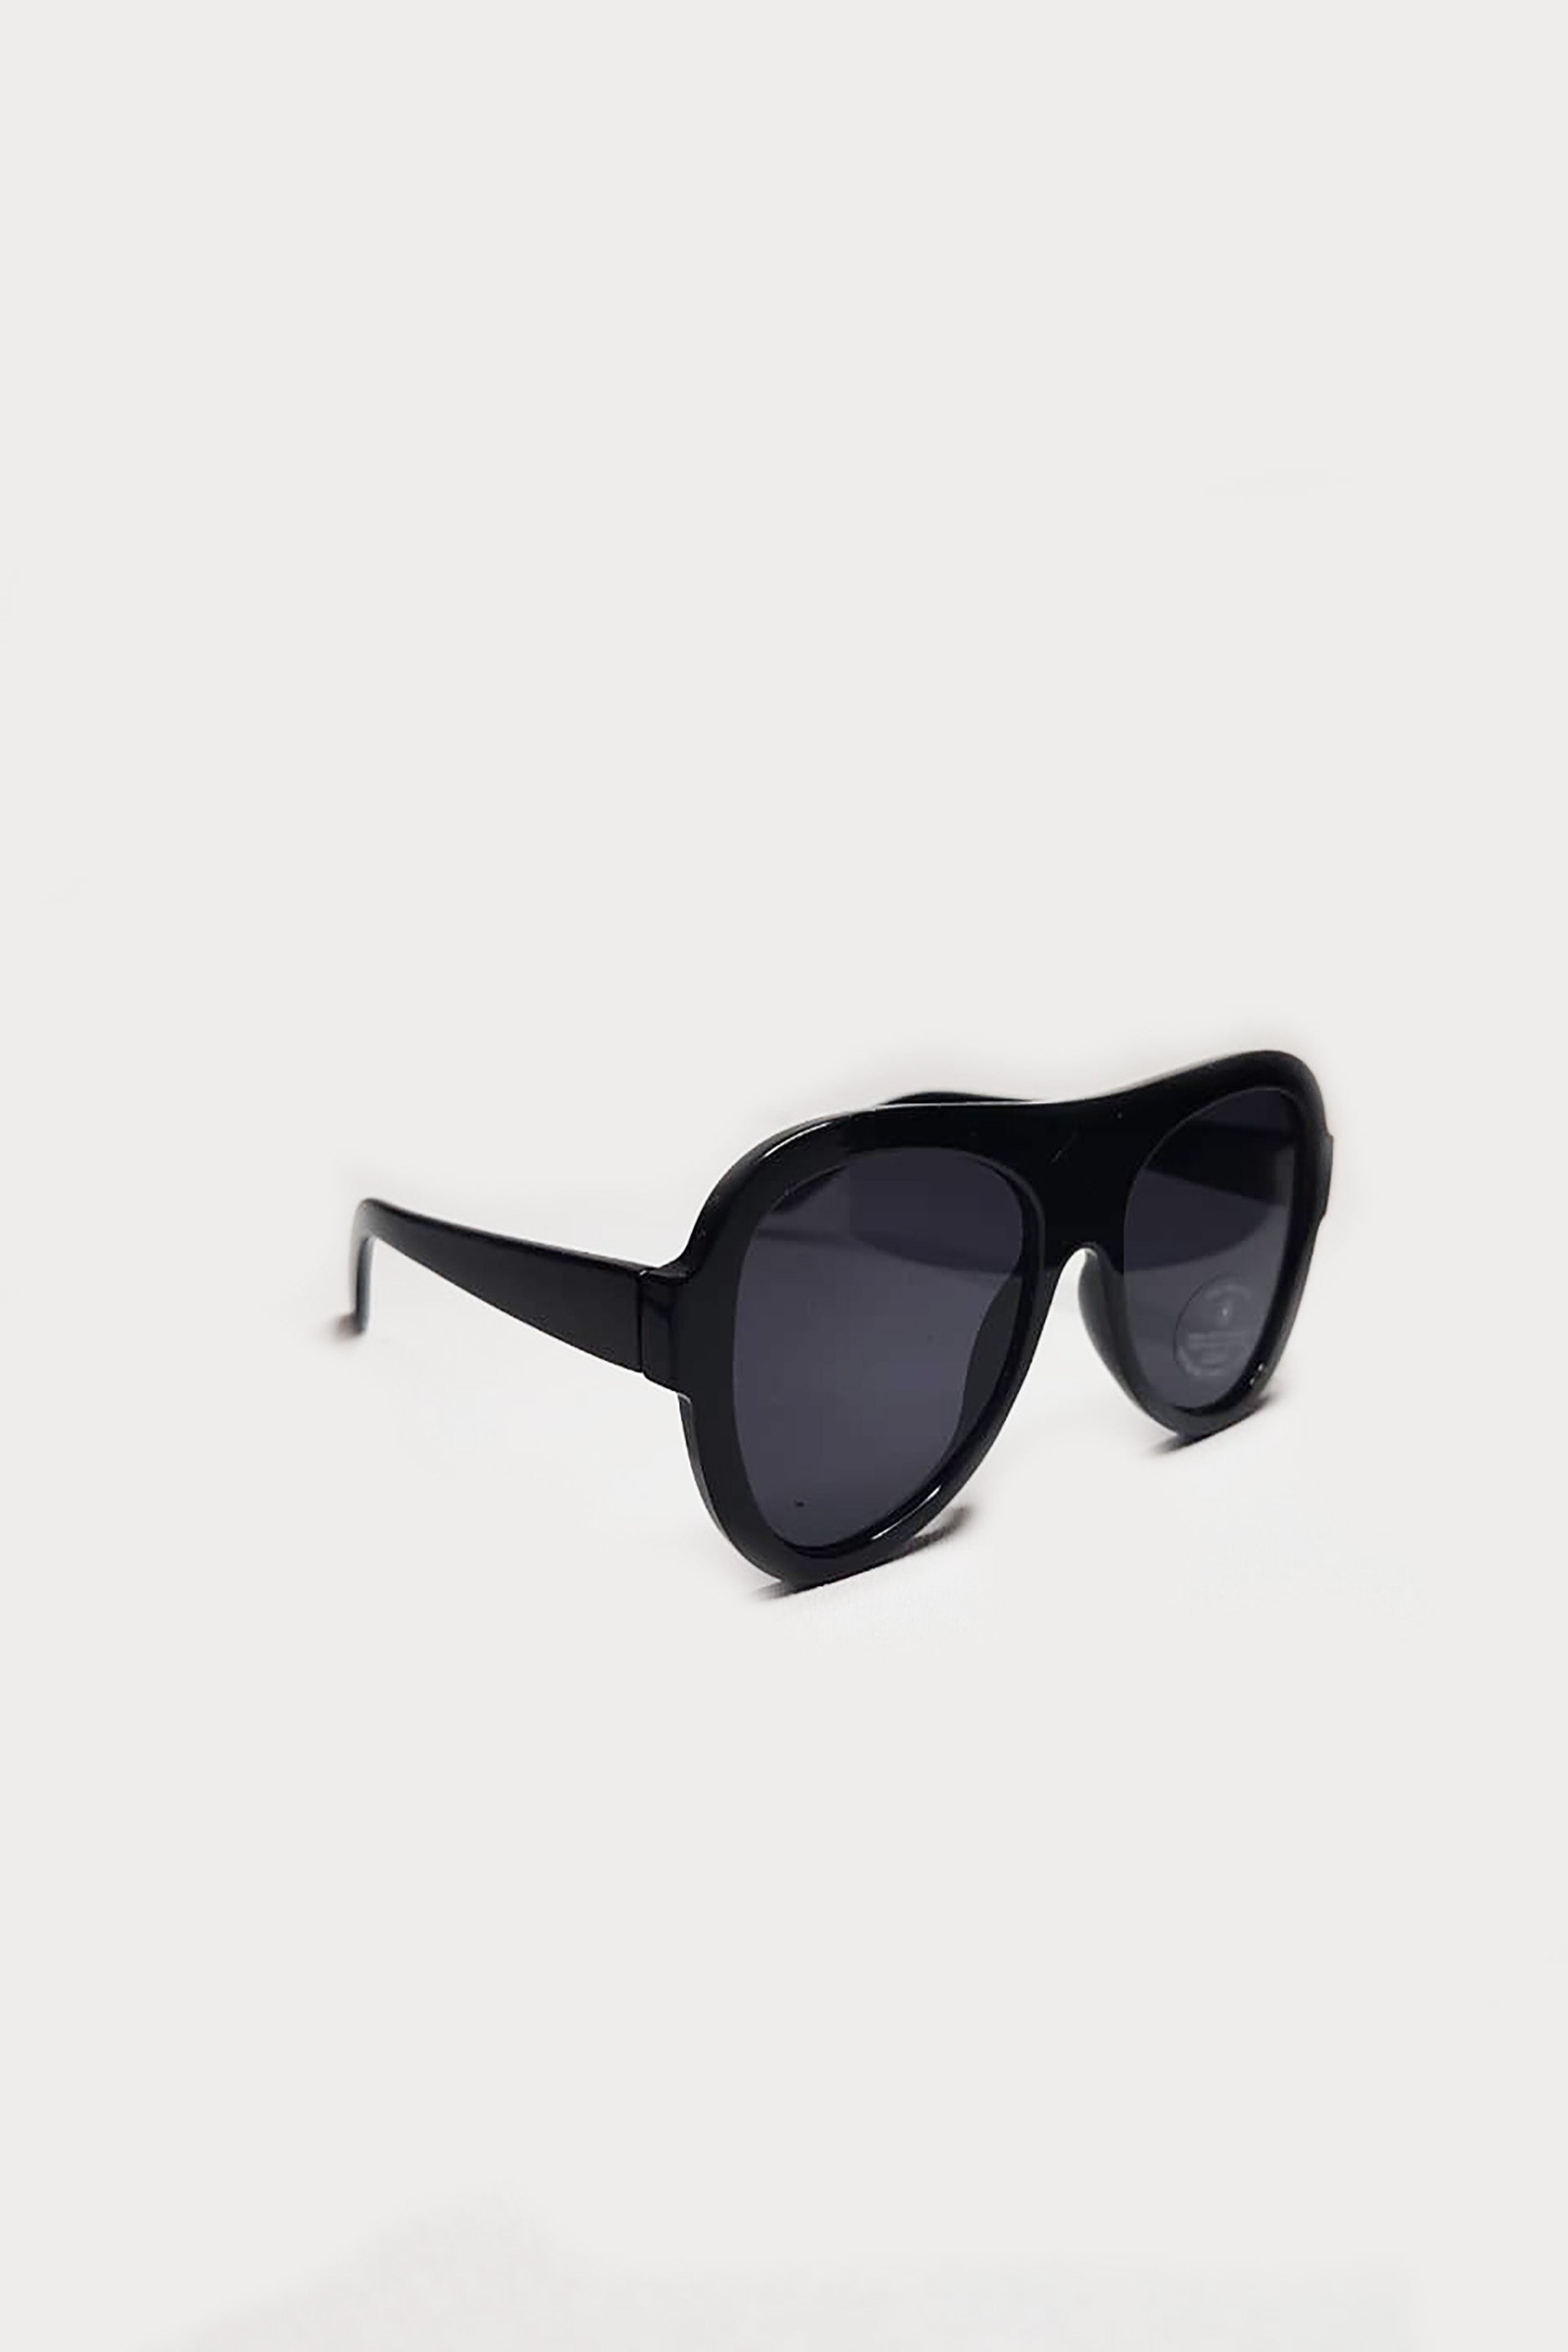 Oversized Black Frame Sunglasses with Black Tinted